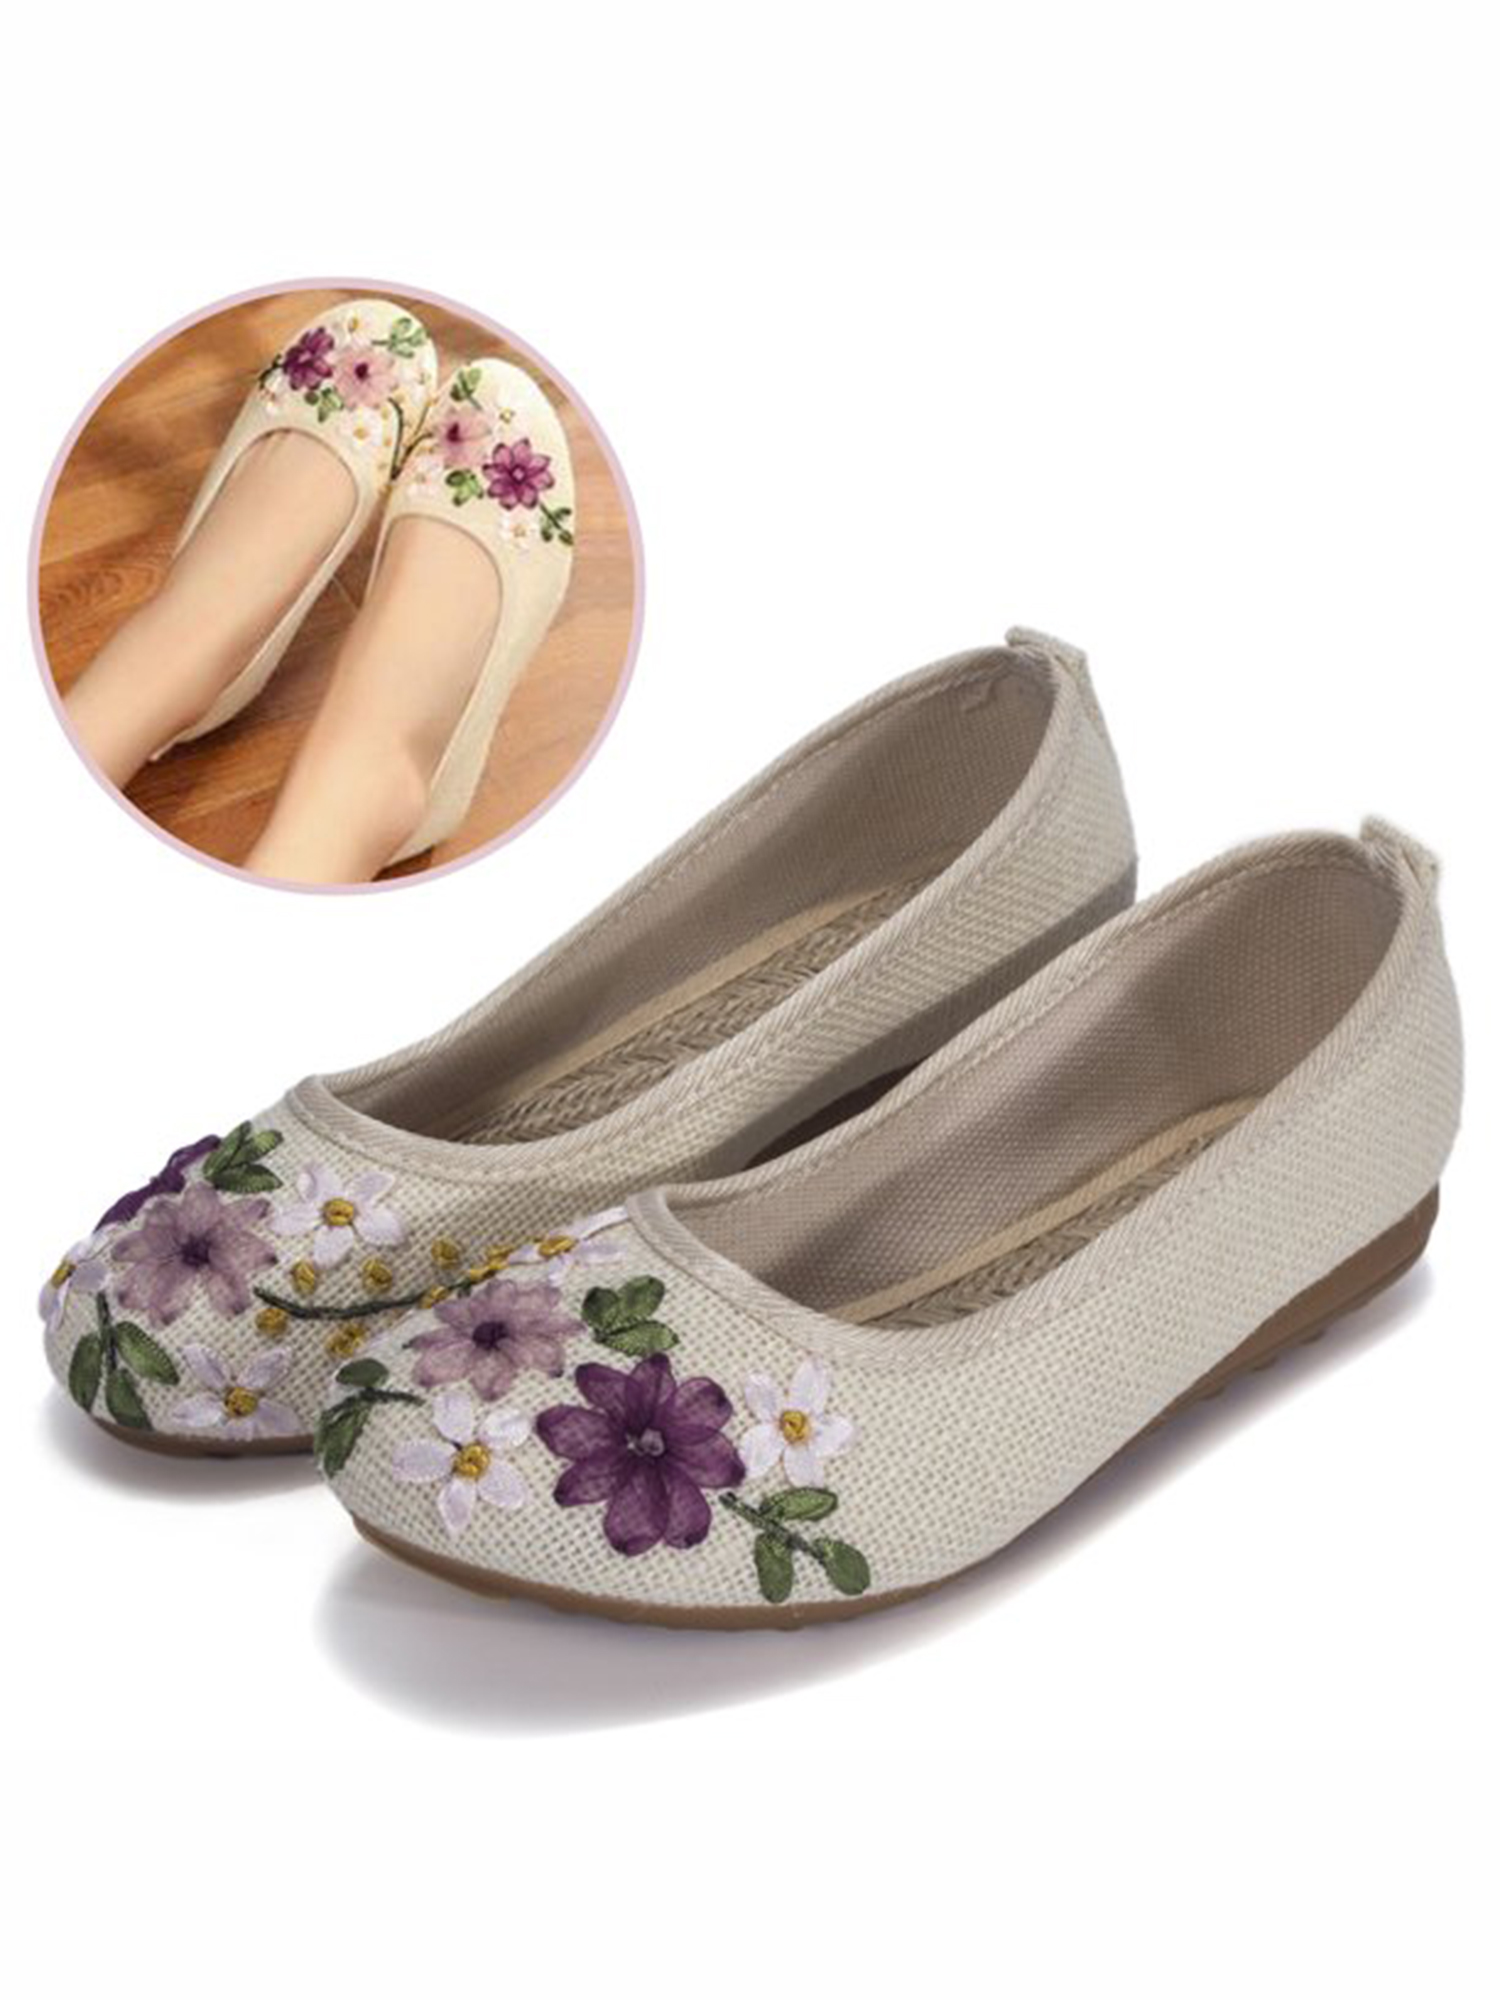 FANNYC Women's Ethnic Style Casual Fit Flat Office Shoes Non-Slip Flat Walking Shoes with Delicate Embroidery Flower Slip On Flats Shoes Round Toe Ballet Flats (4-10 Size) - image 1 of 7